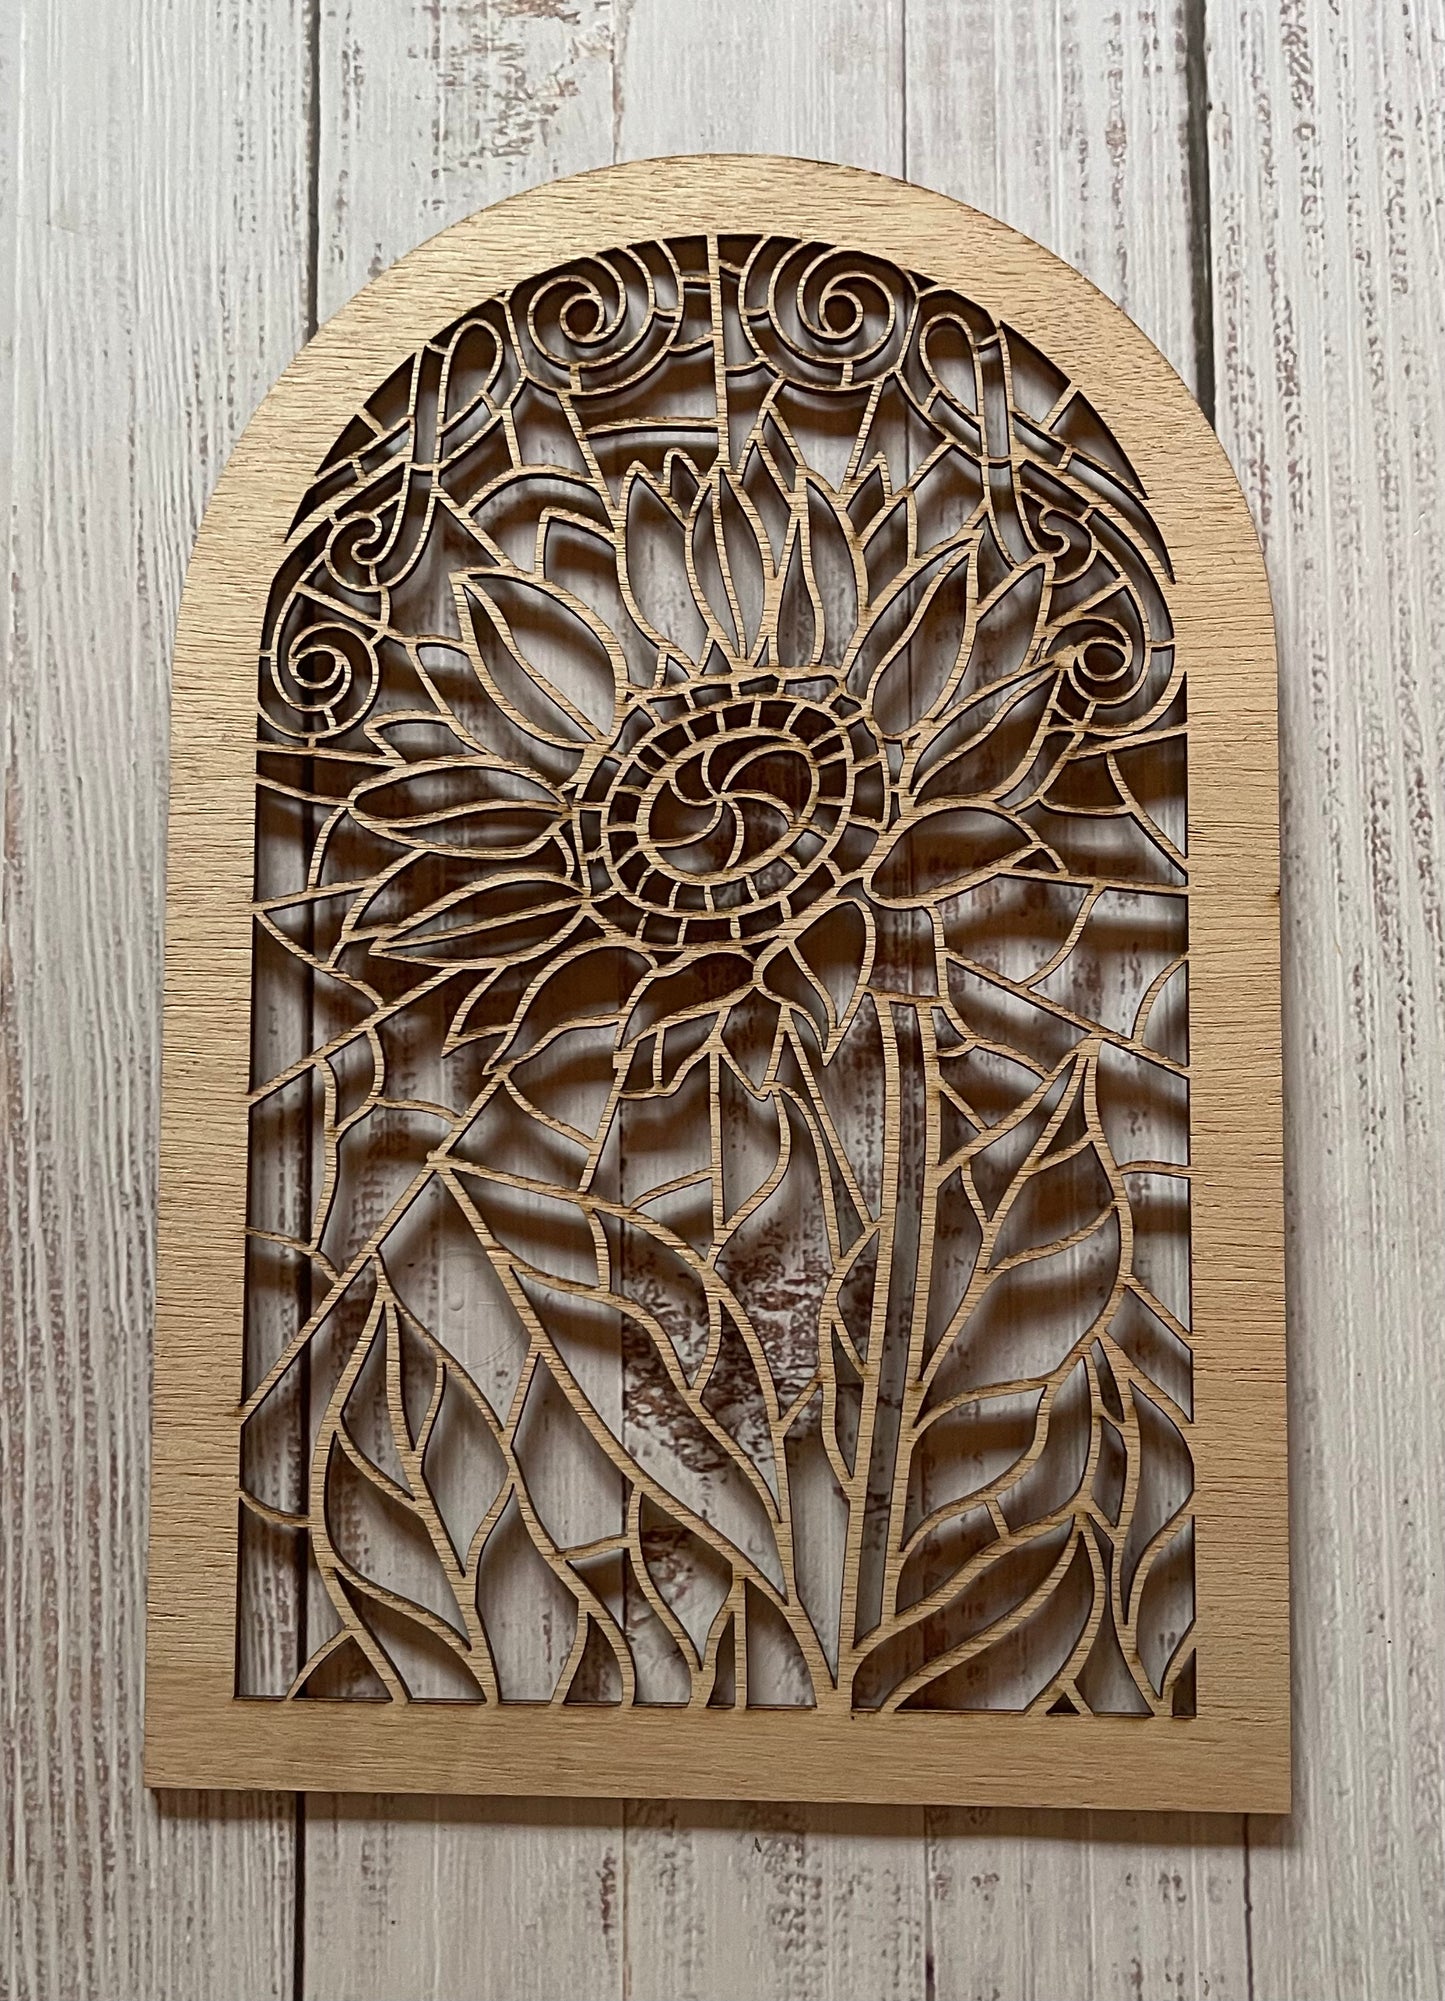 Sunflower Stained Glass Frame Art Wood Cut Out. Unfinished Wood frame. Resin art frame. DIY wood cutout. Unfinished laser cut wood resin frame.